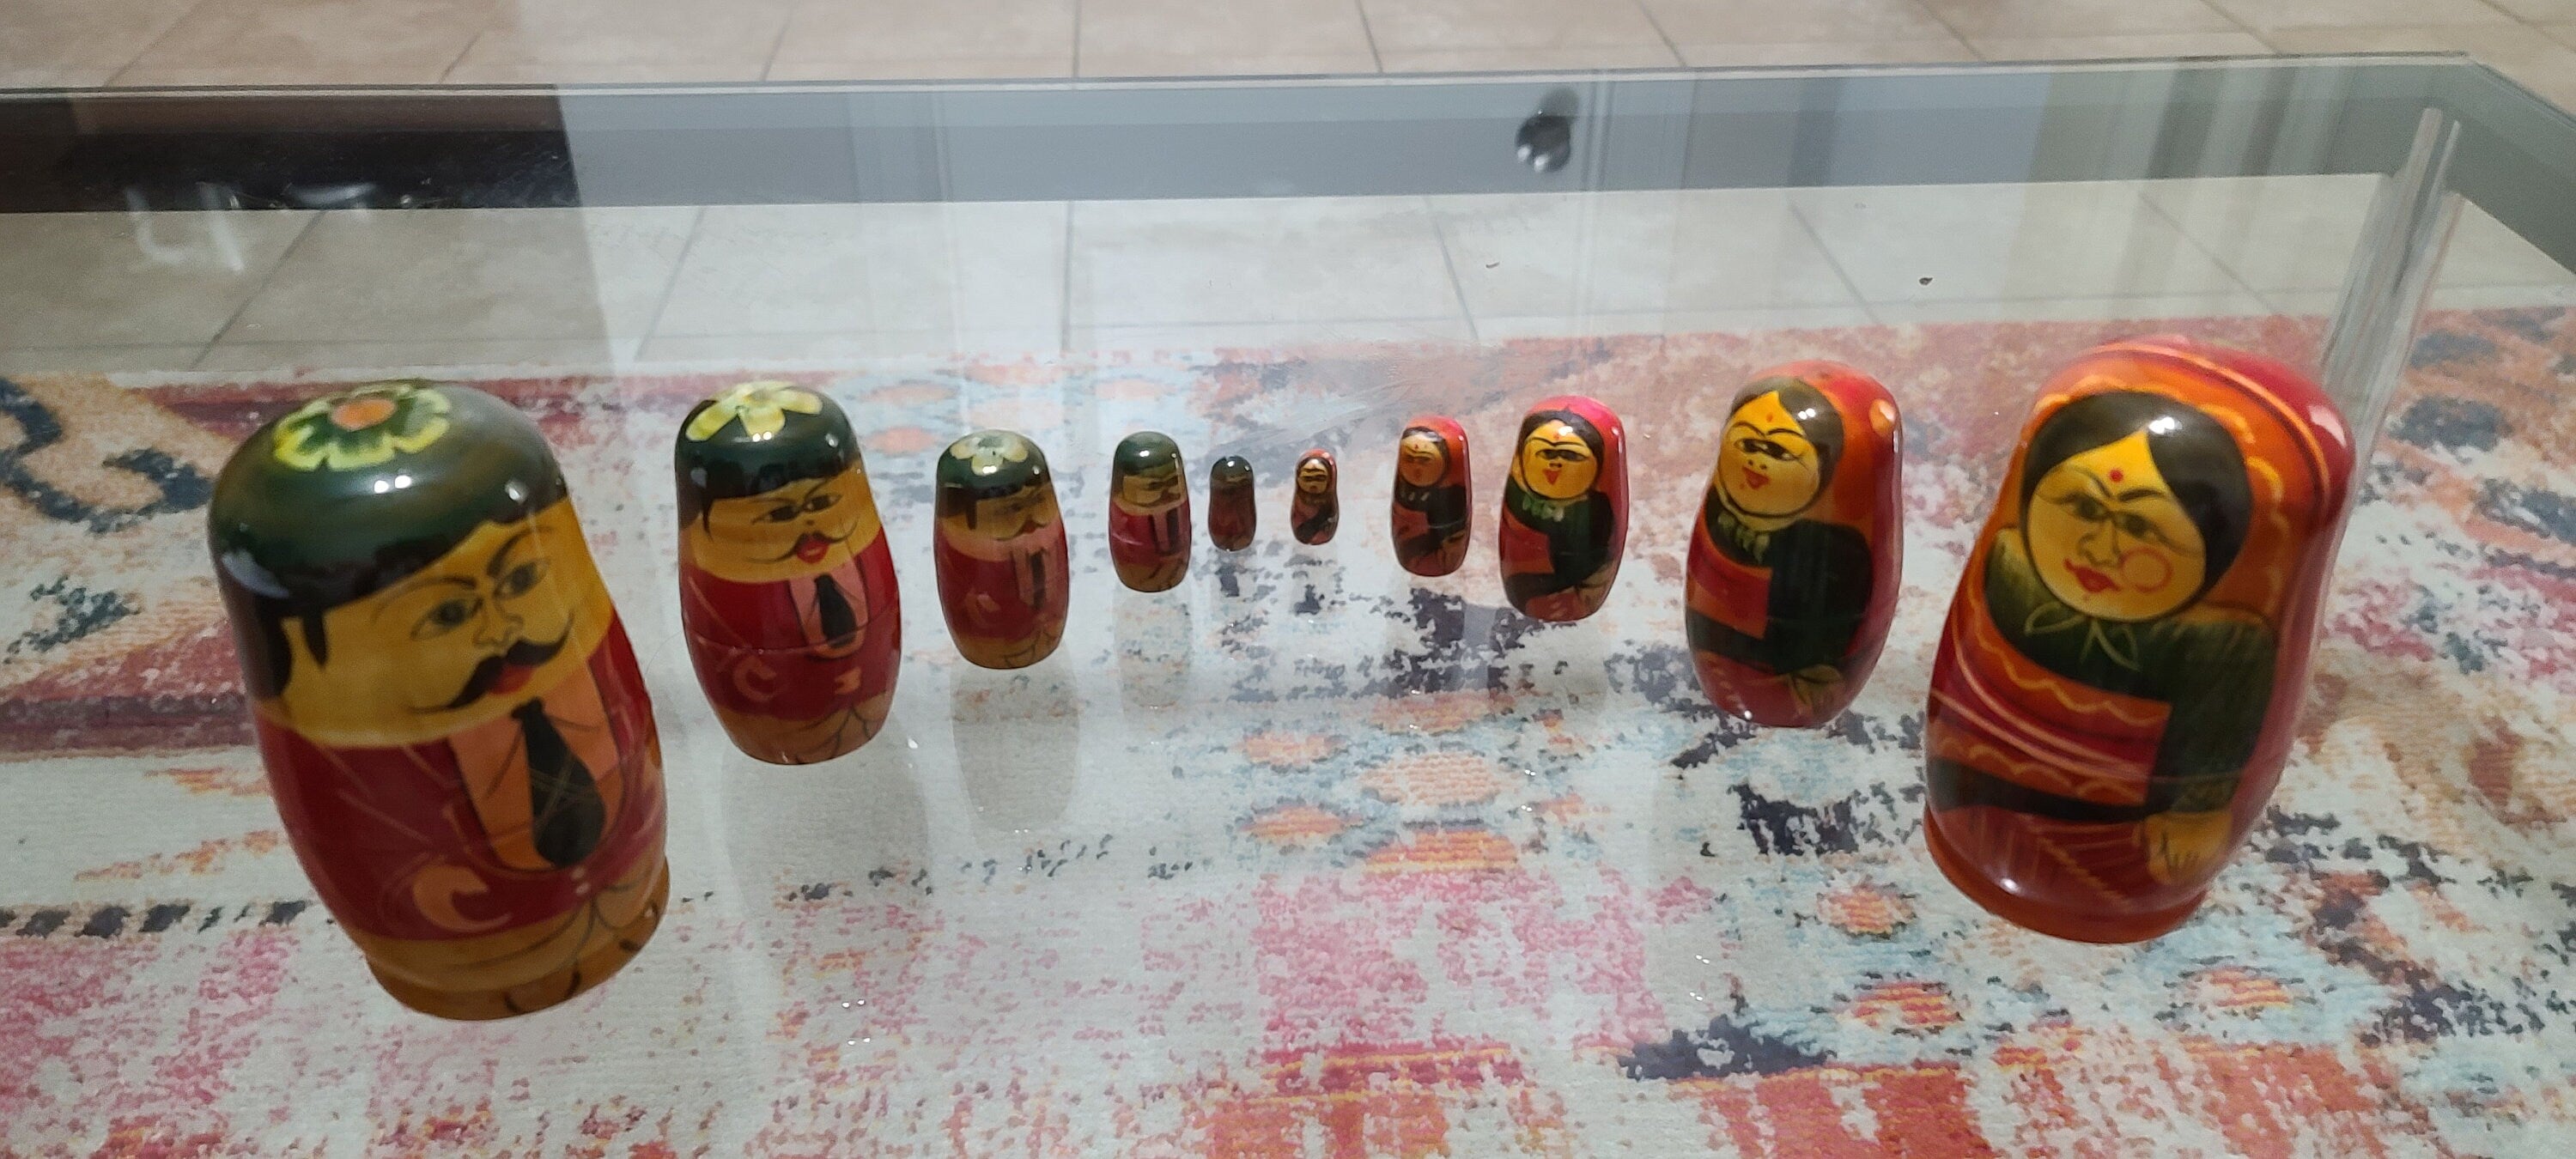 Nesting Dolls | Russian Nesting Dolls | Stacking Dolls | Toy in Toy 1 Pc